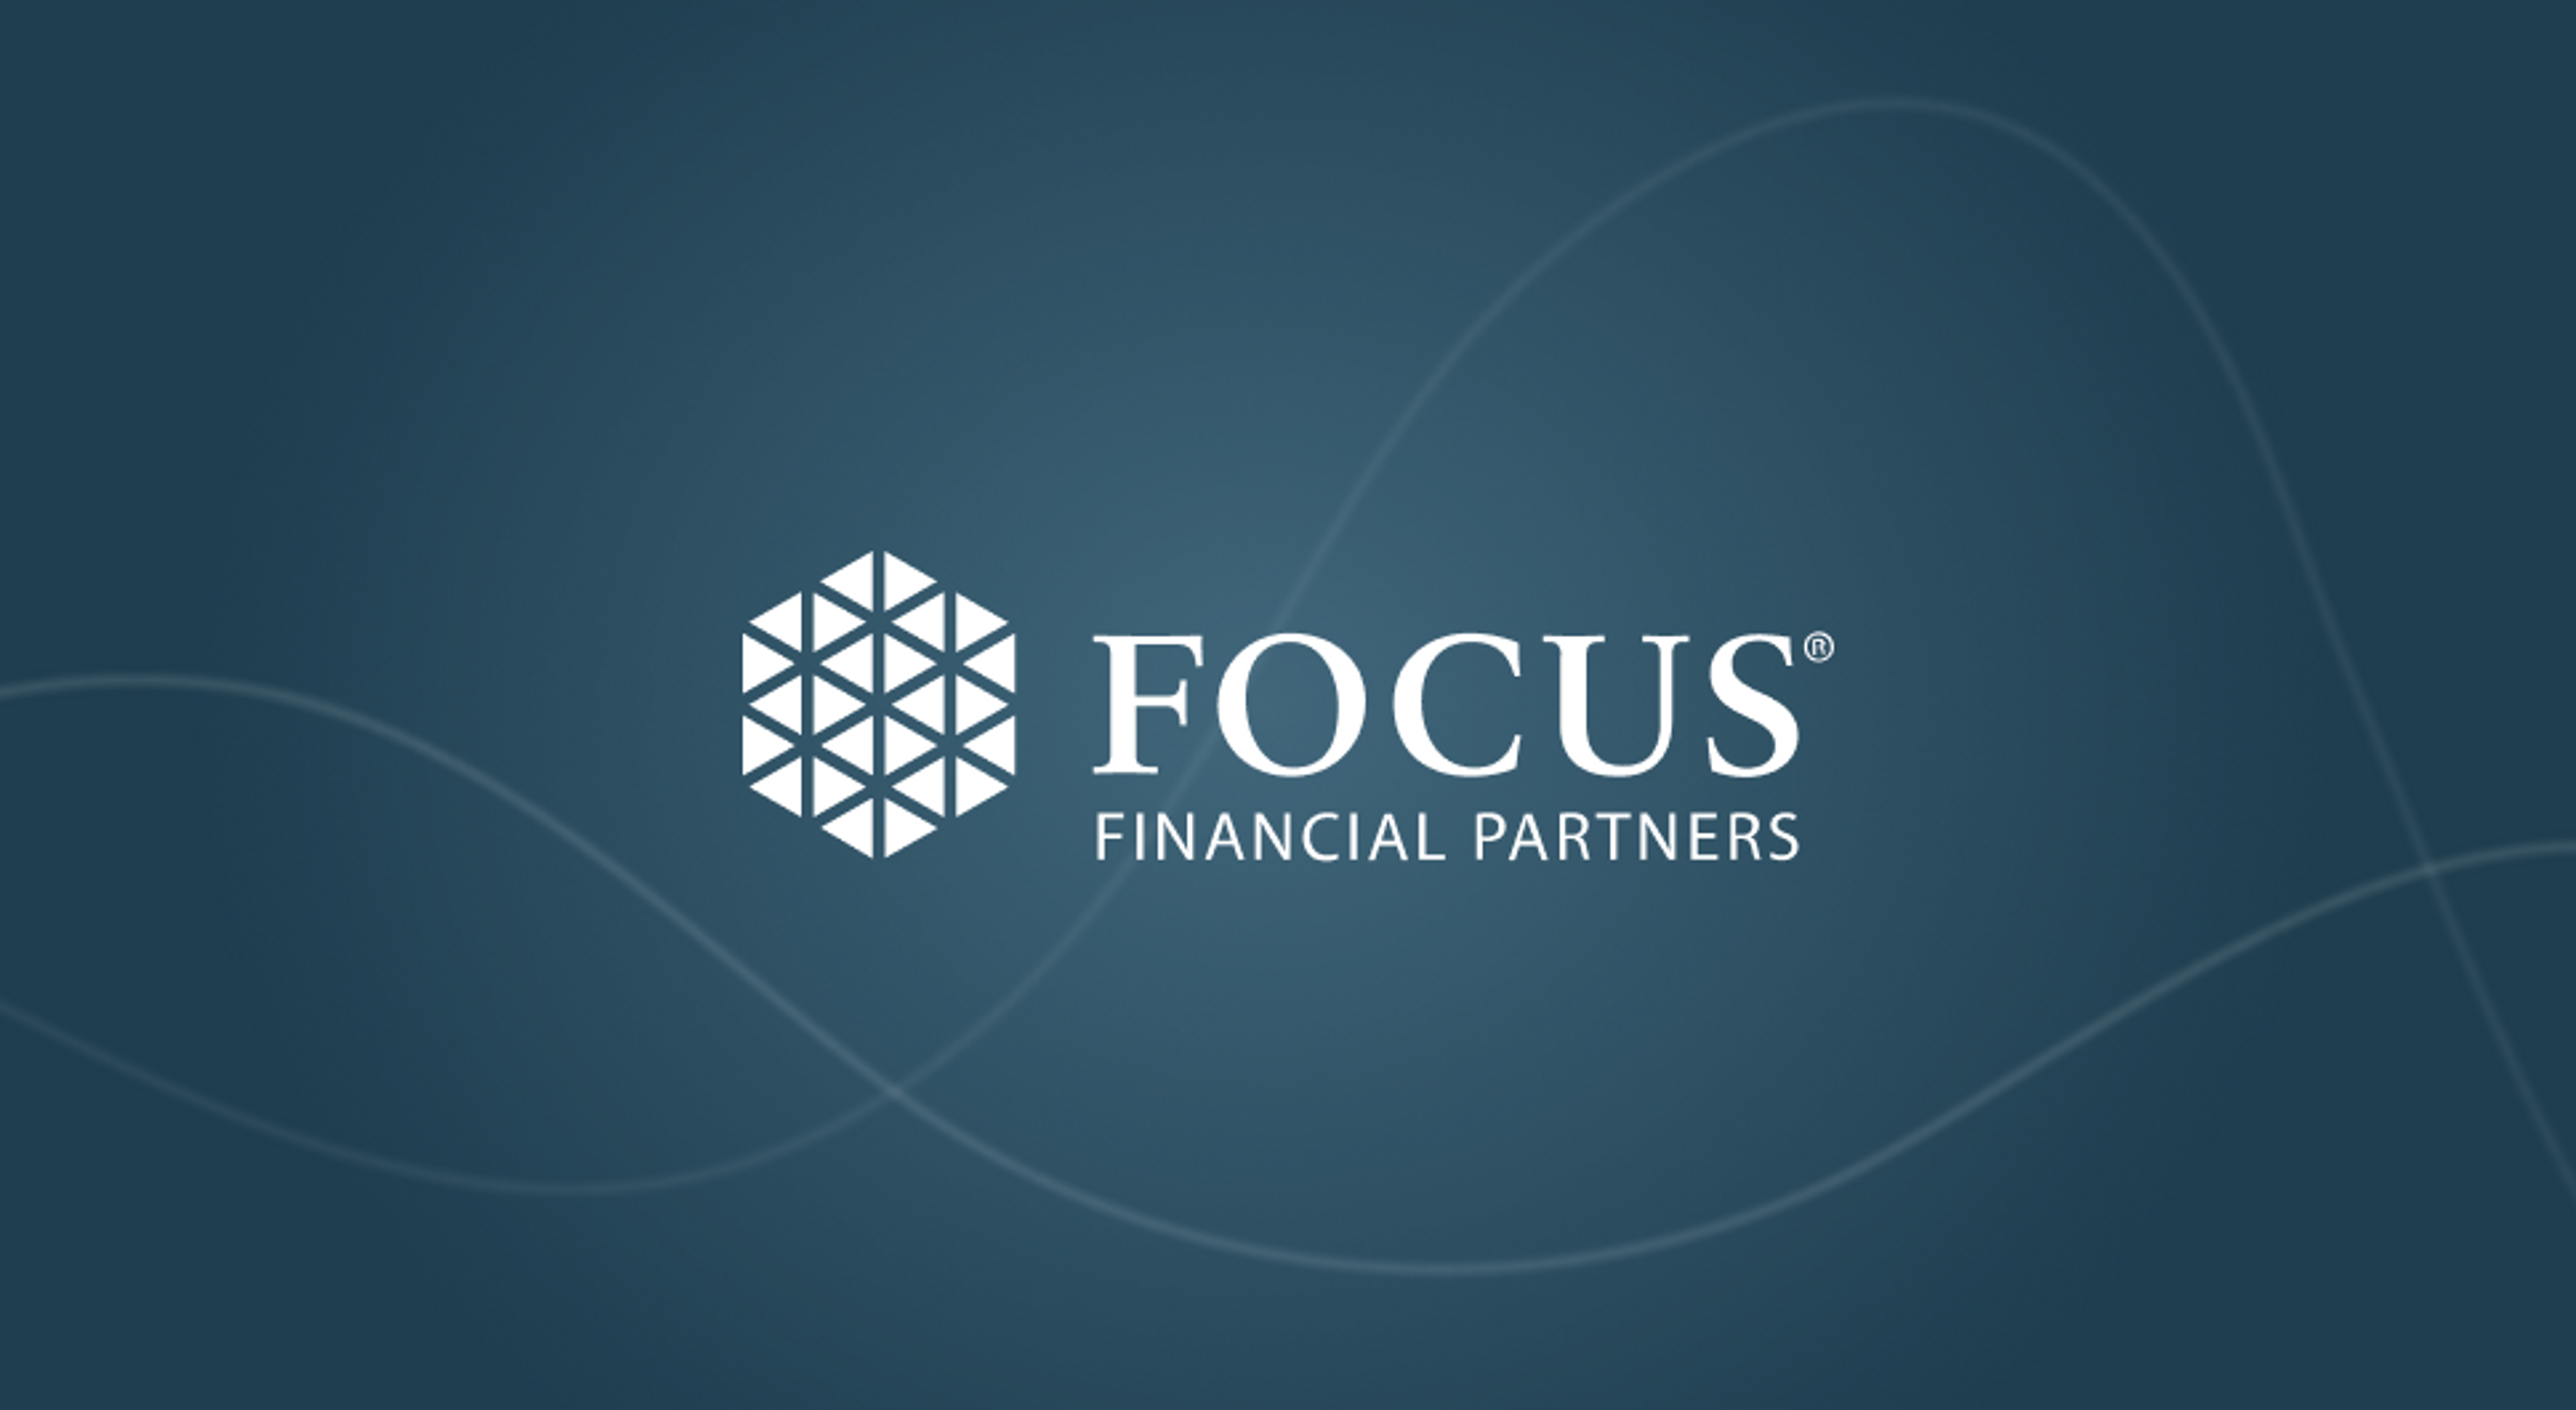 Focus Financial Partners Makes a Minority Investment in Luminary